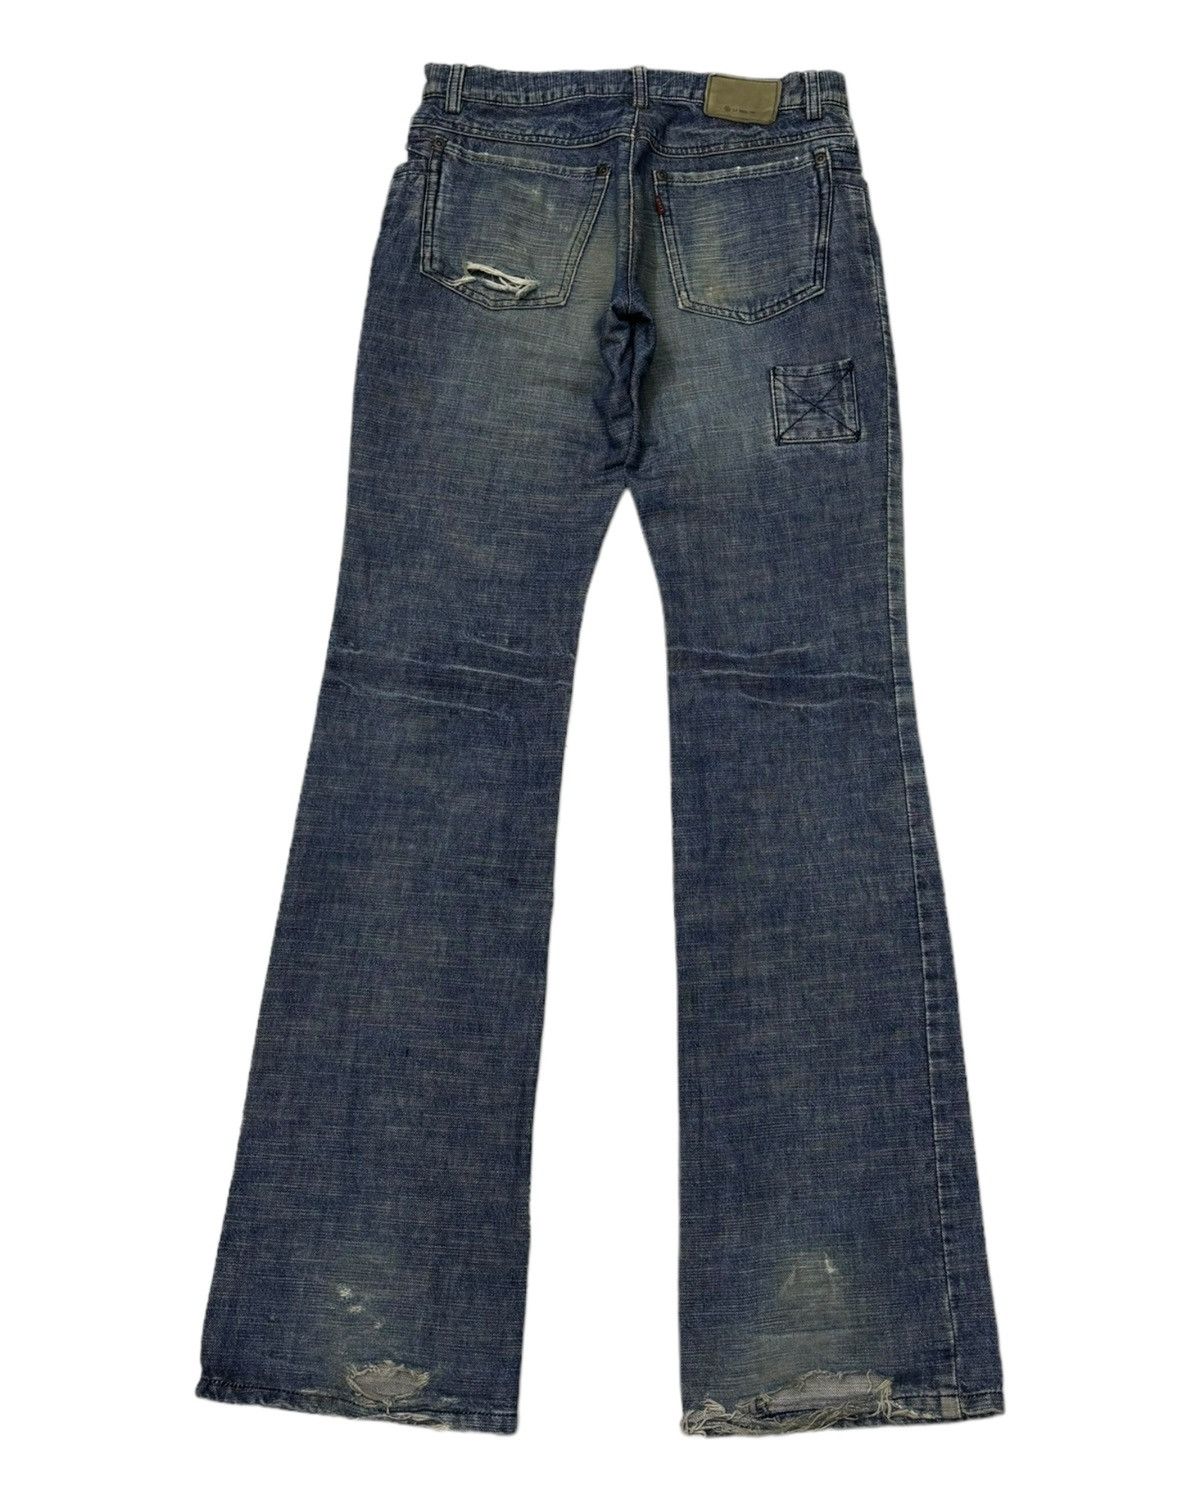 Archival Clothing - 🔥ARCHIVE L7 REAL HIP JAPANESE FLARED DENIM BOOTCUT JEANS - 7